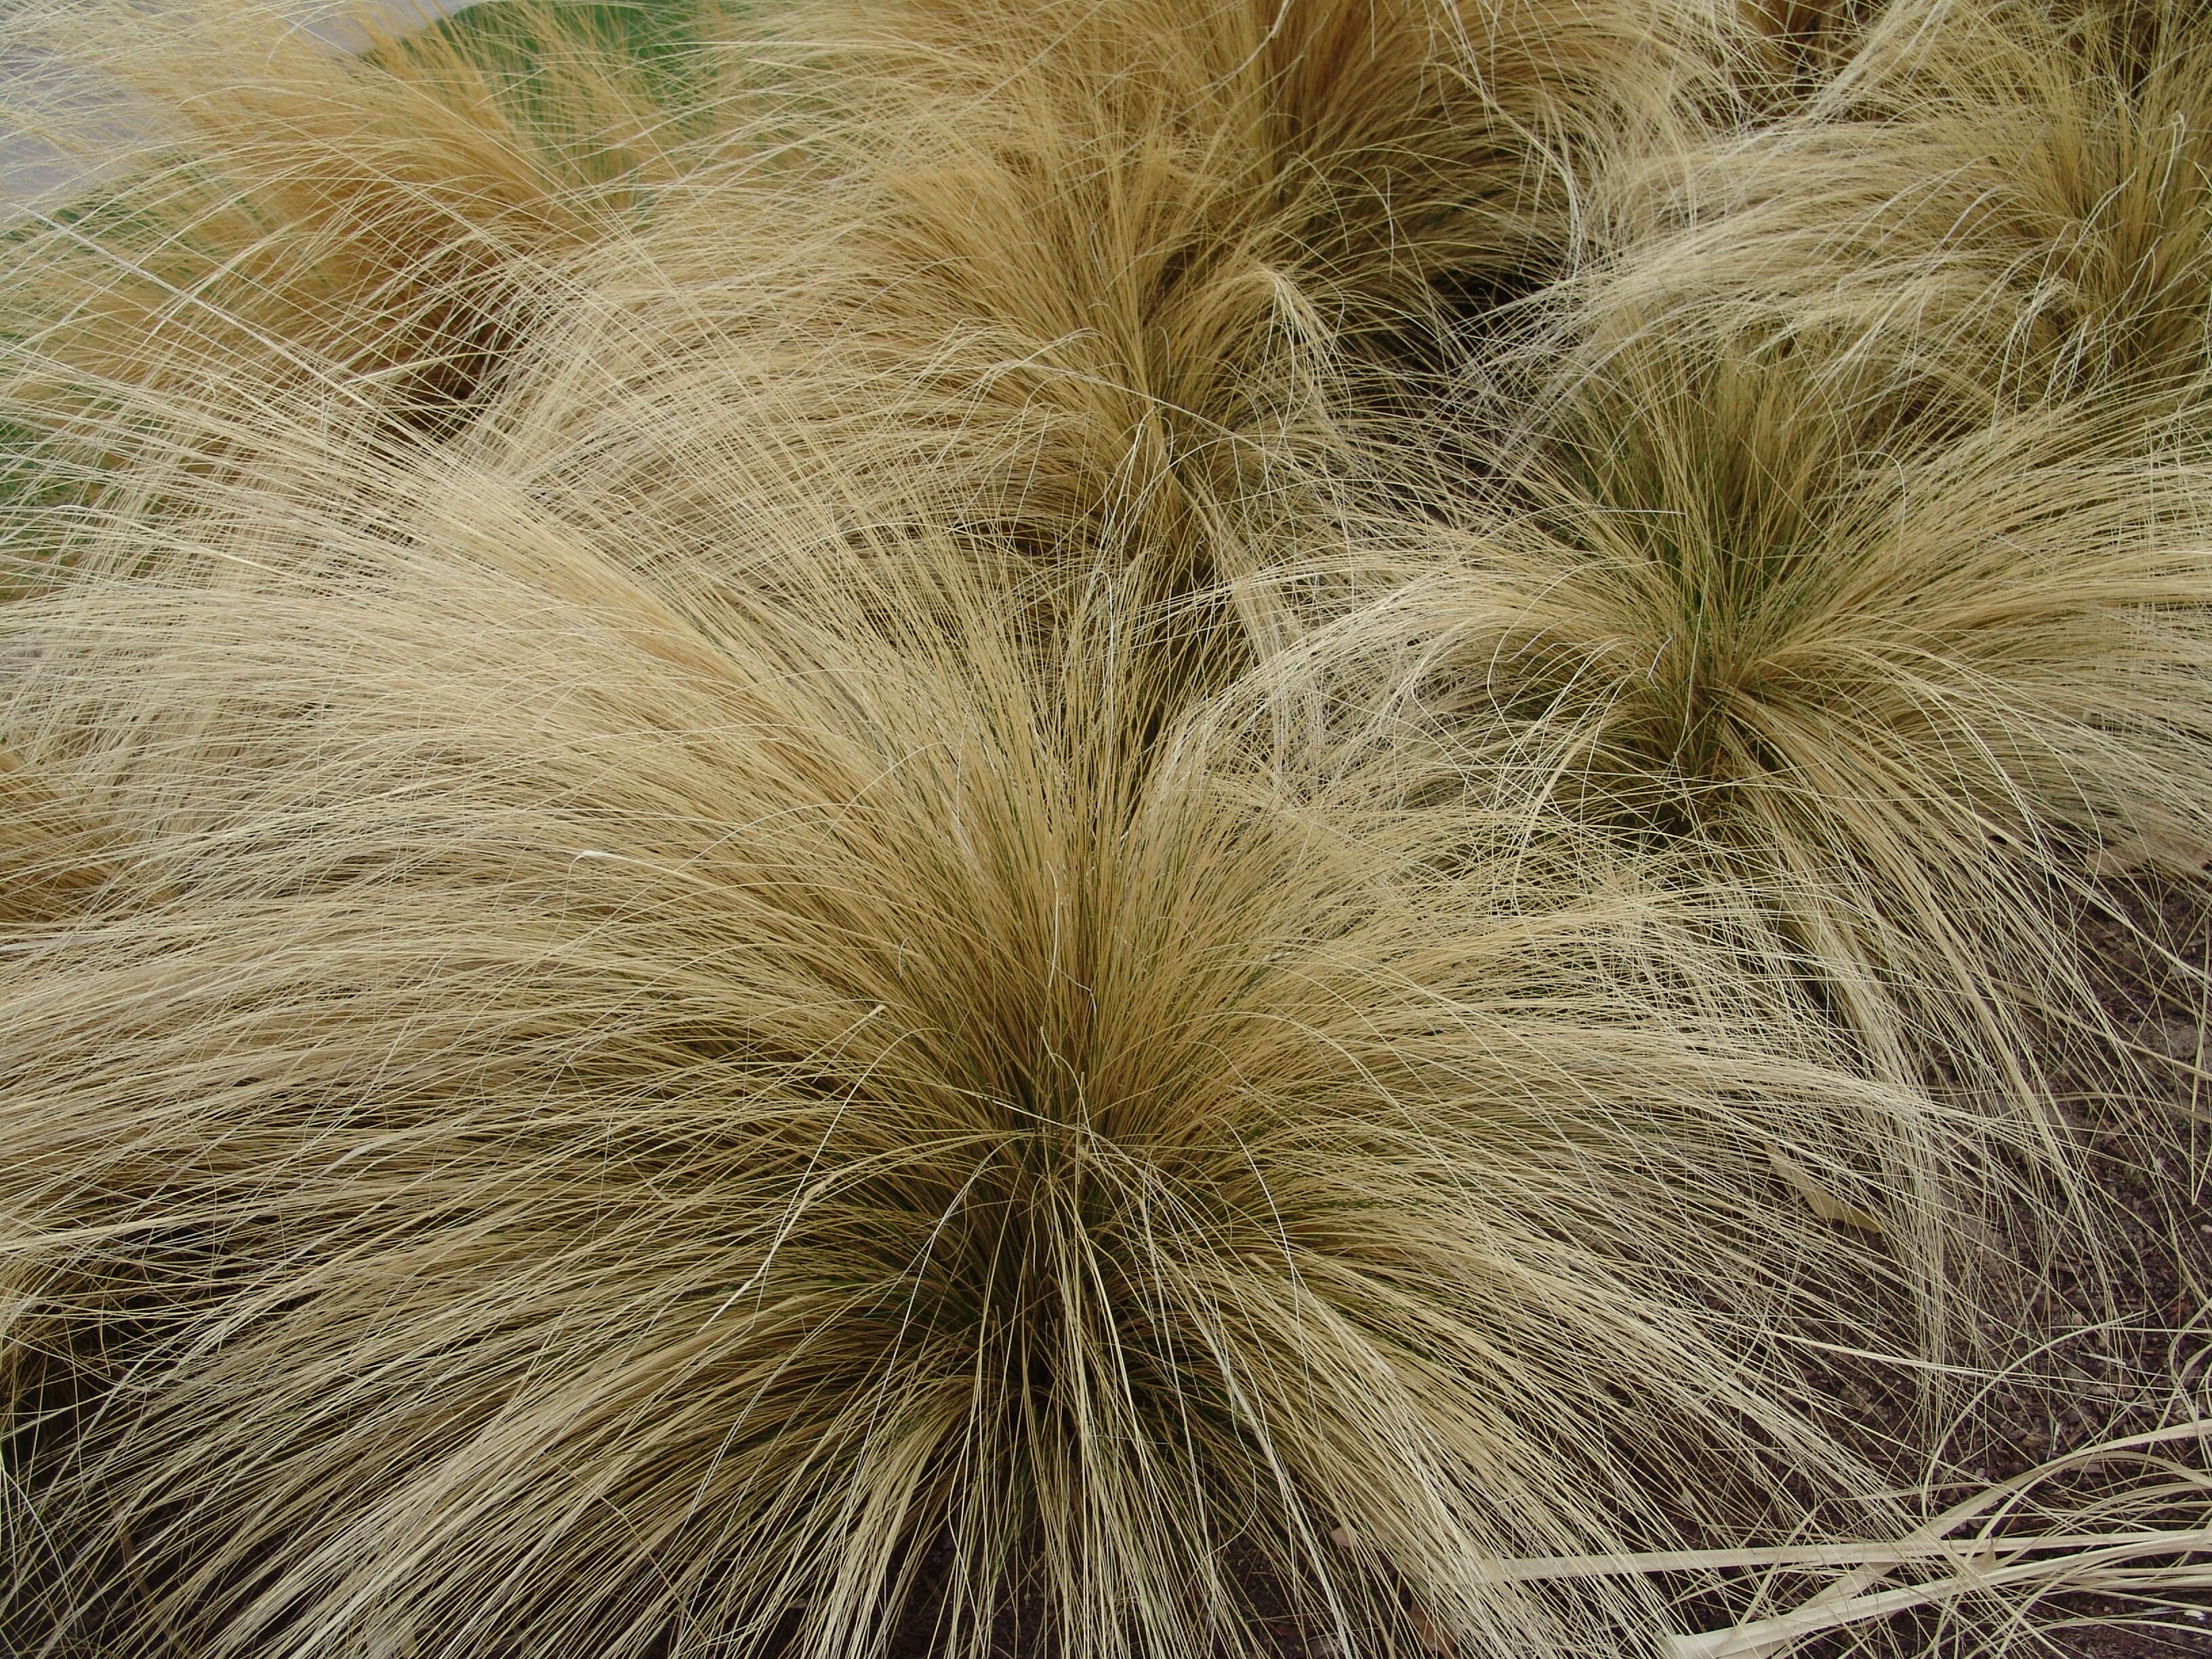 Image of Mexican Feather Grass